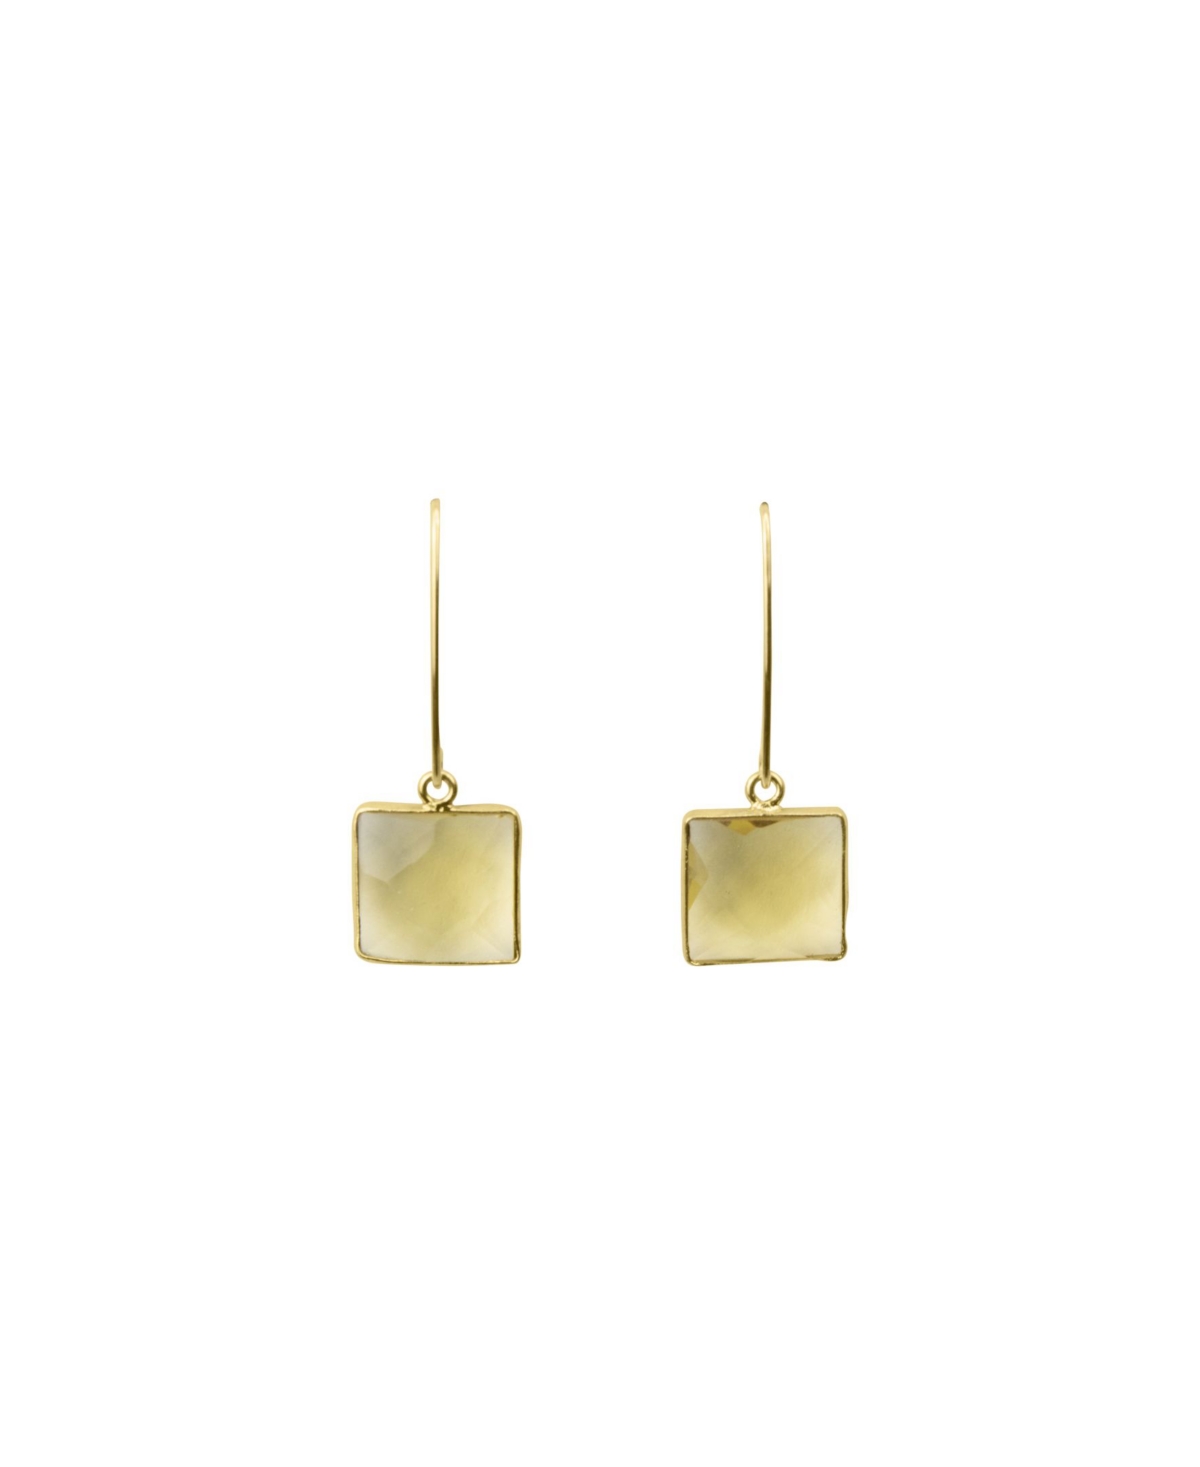 Citrine Stone Drop Earrings with 14K Gold Filled Artesian Earwires - Gold - Fill